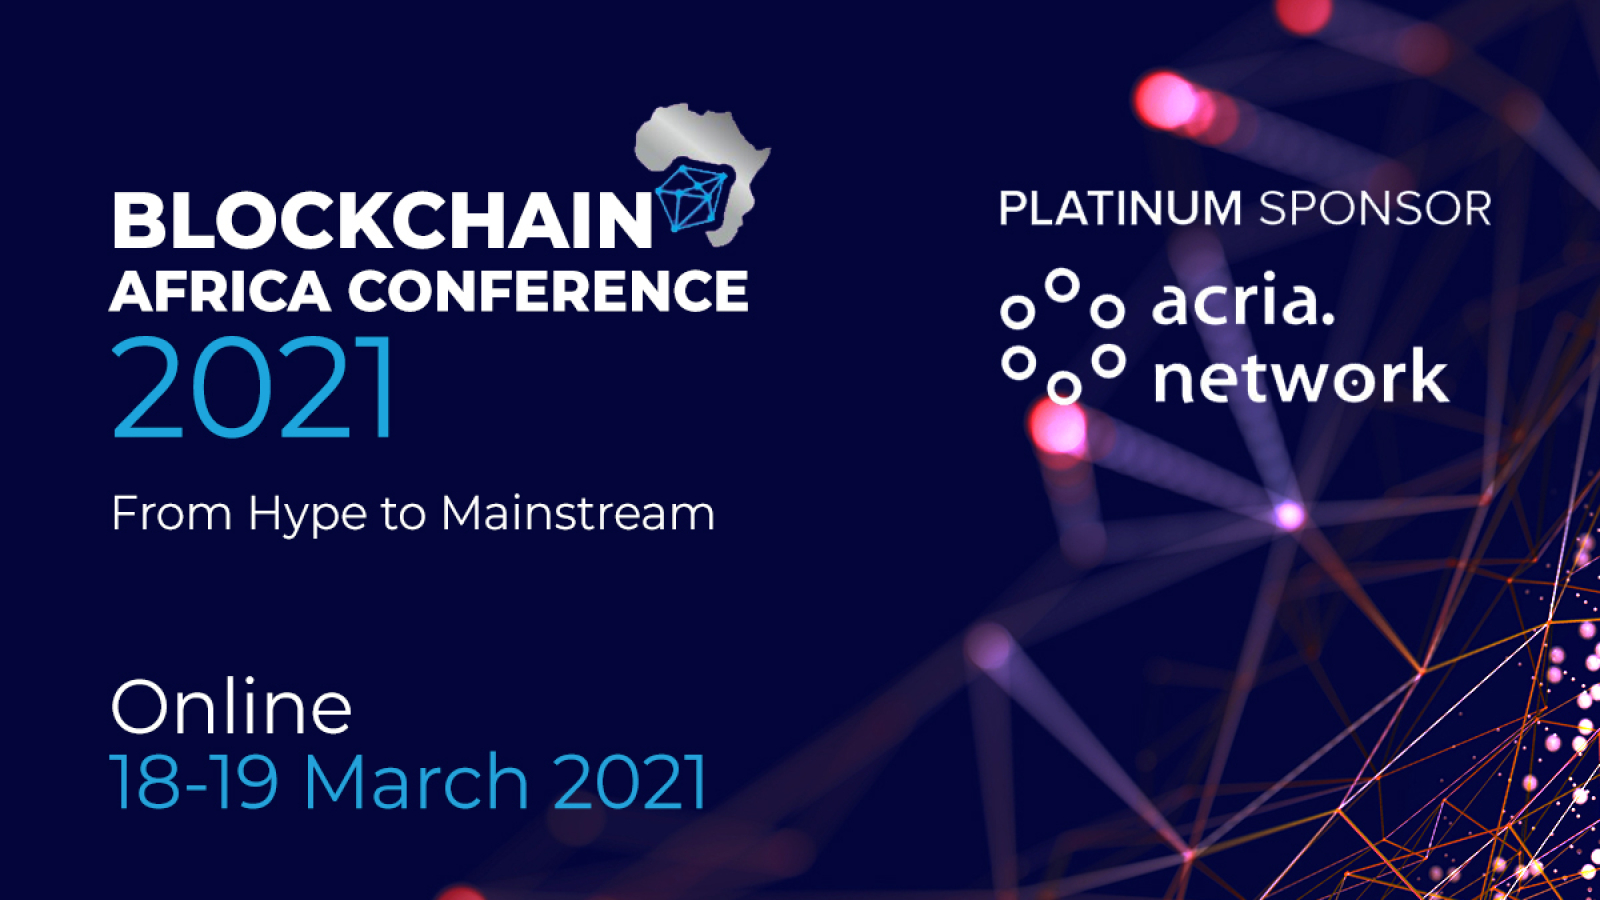 Blockchain Africa Conference 2021: Beyond the Hype, Announces Keynote Speakers